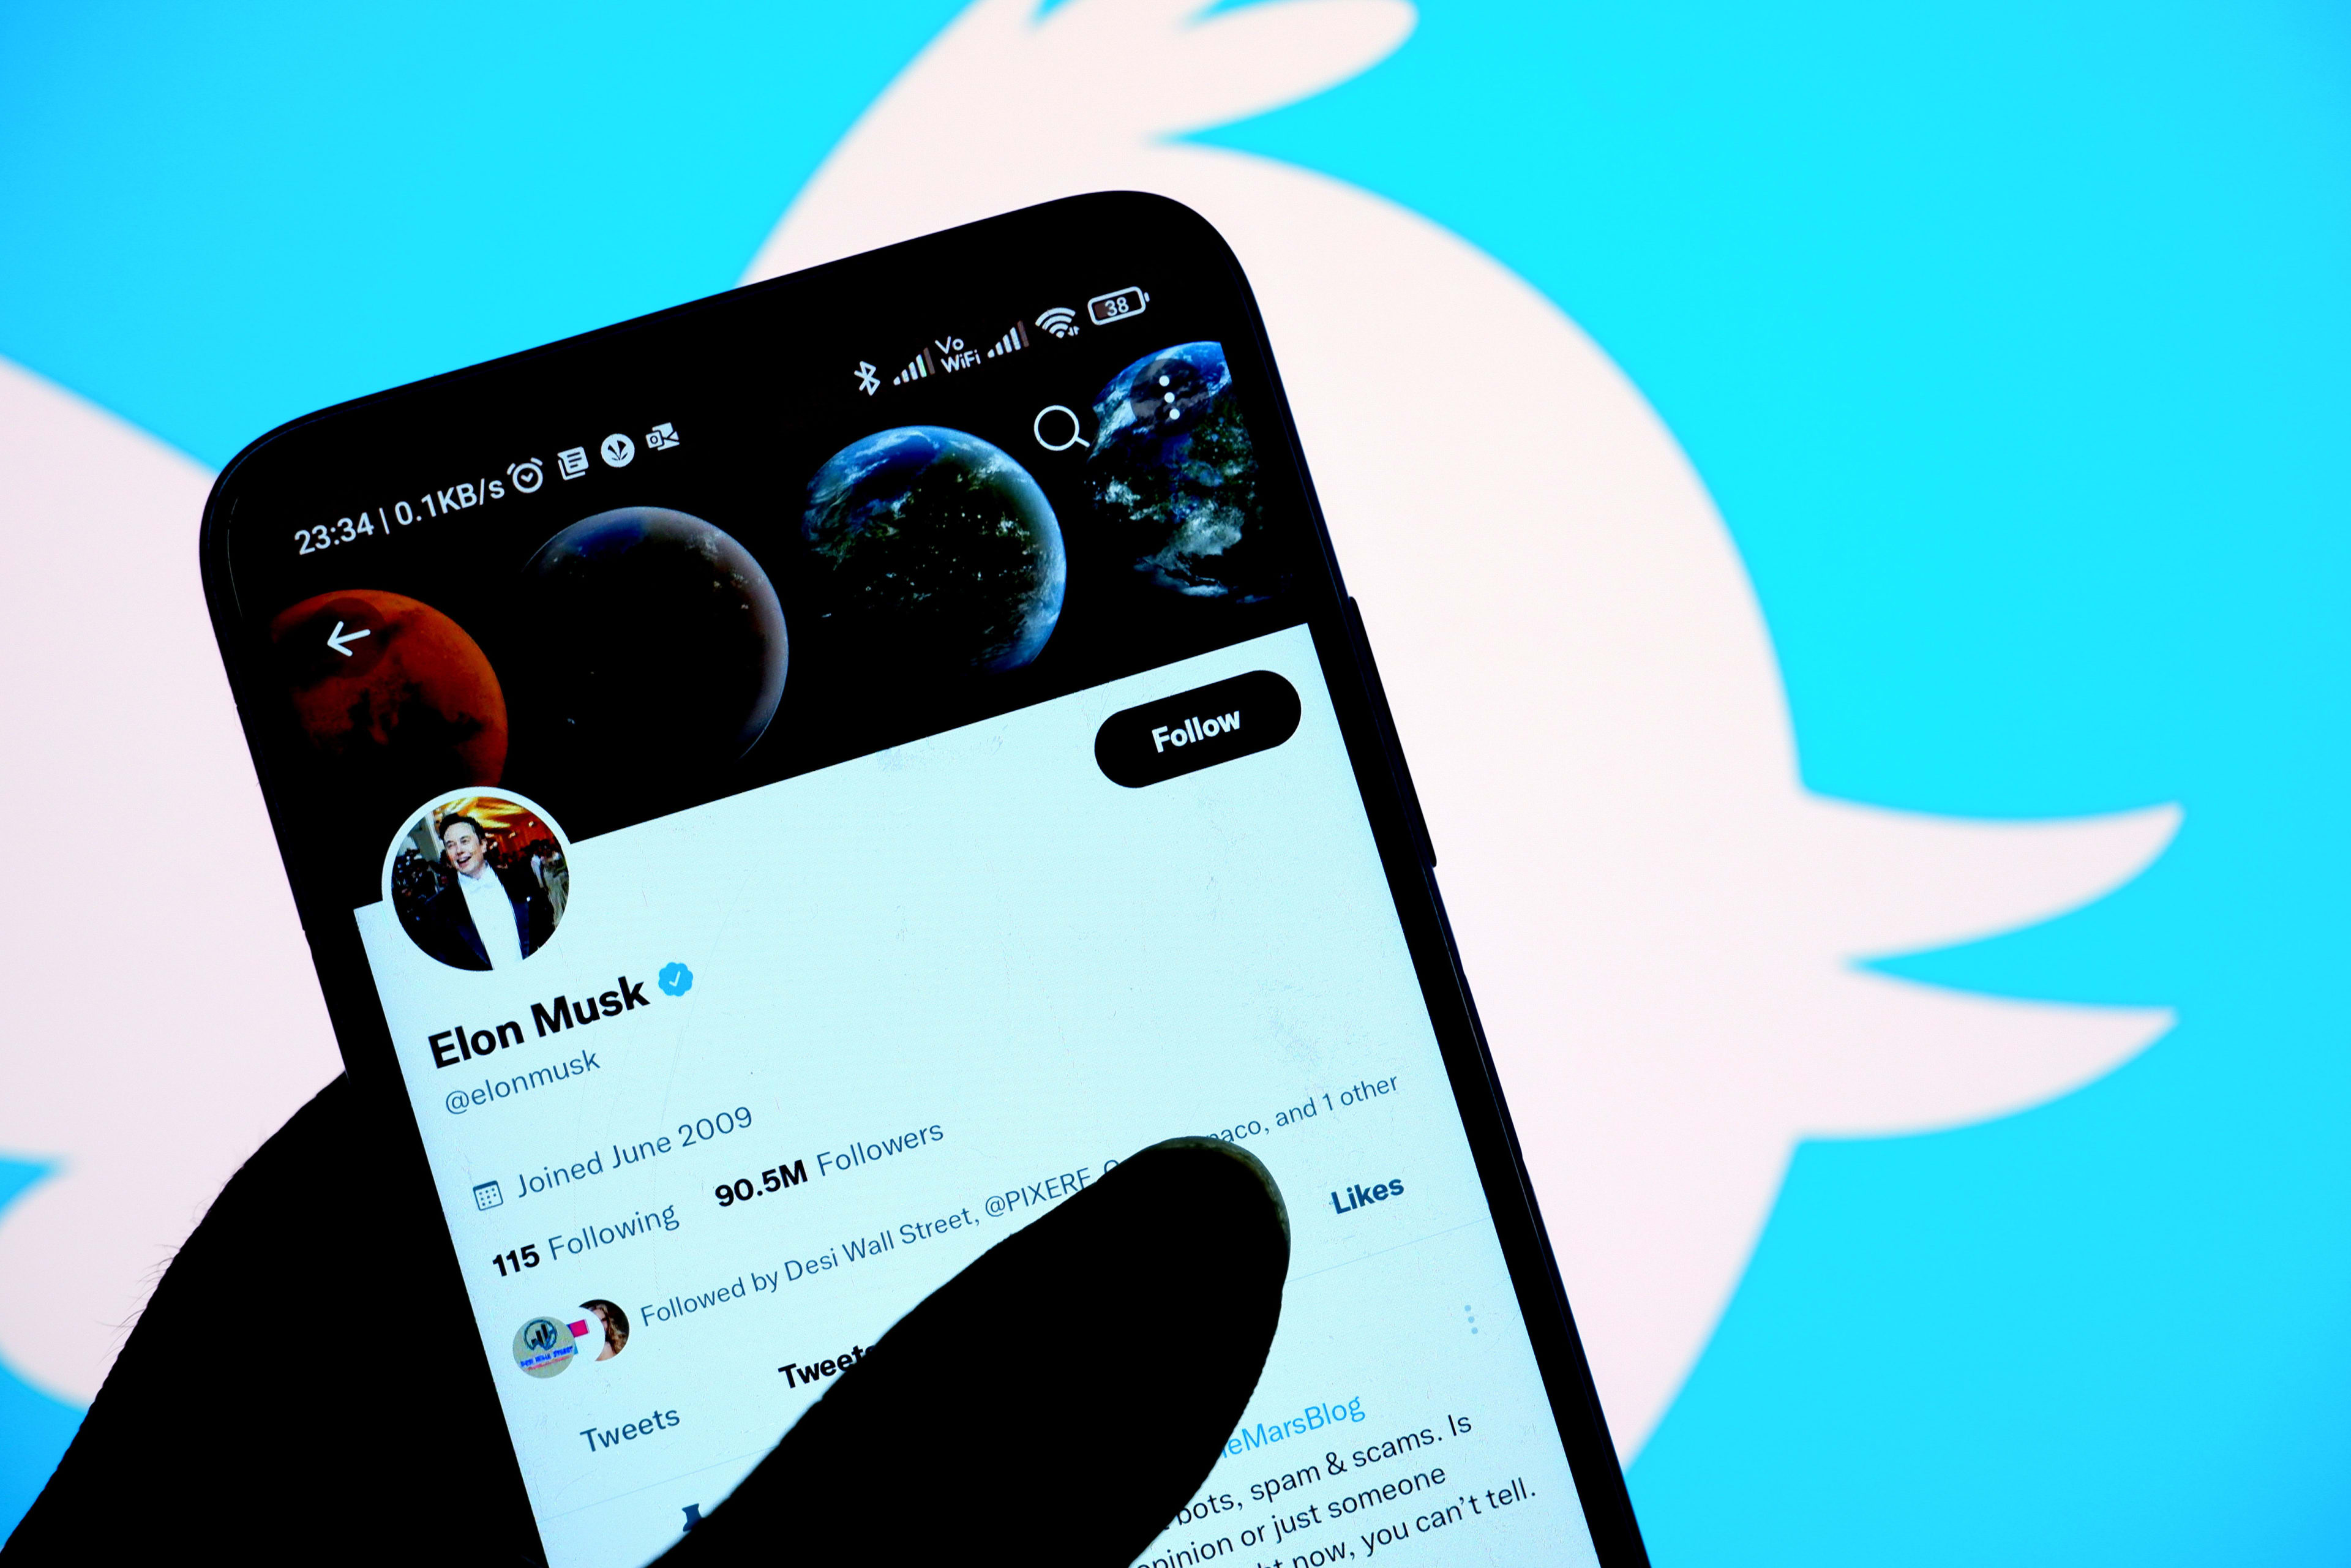 Computer scientists explain why Musk’s obsession with Twitter bots misses the point